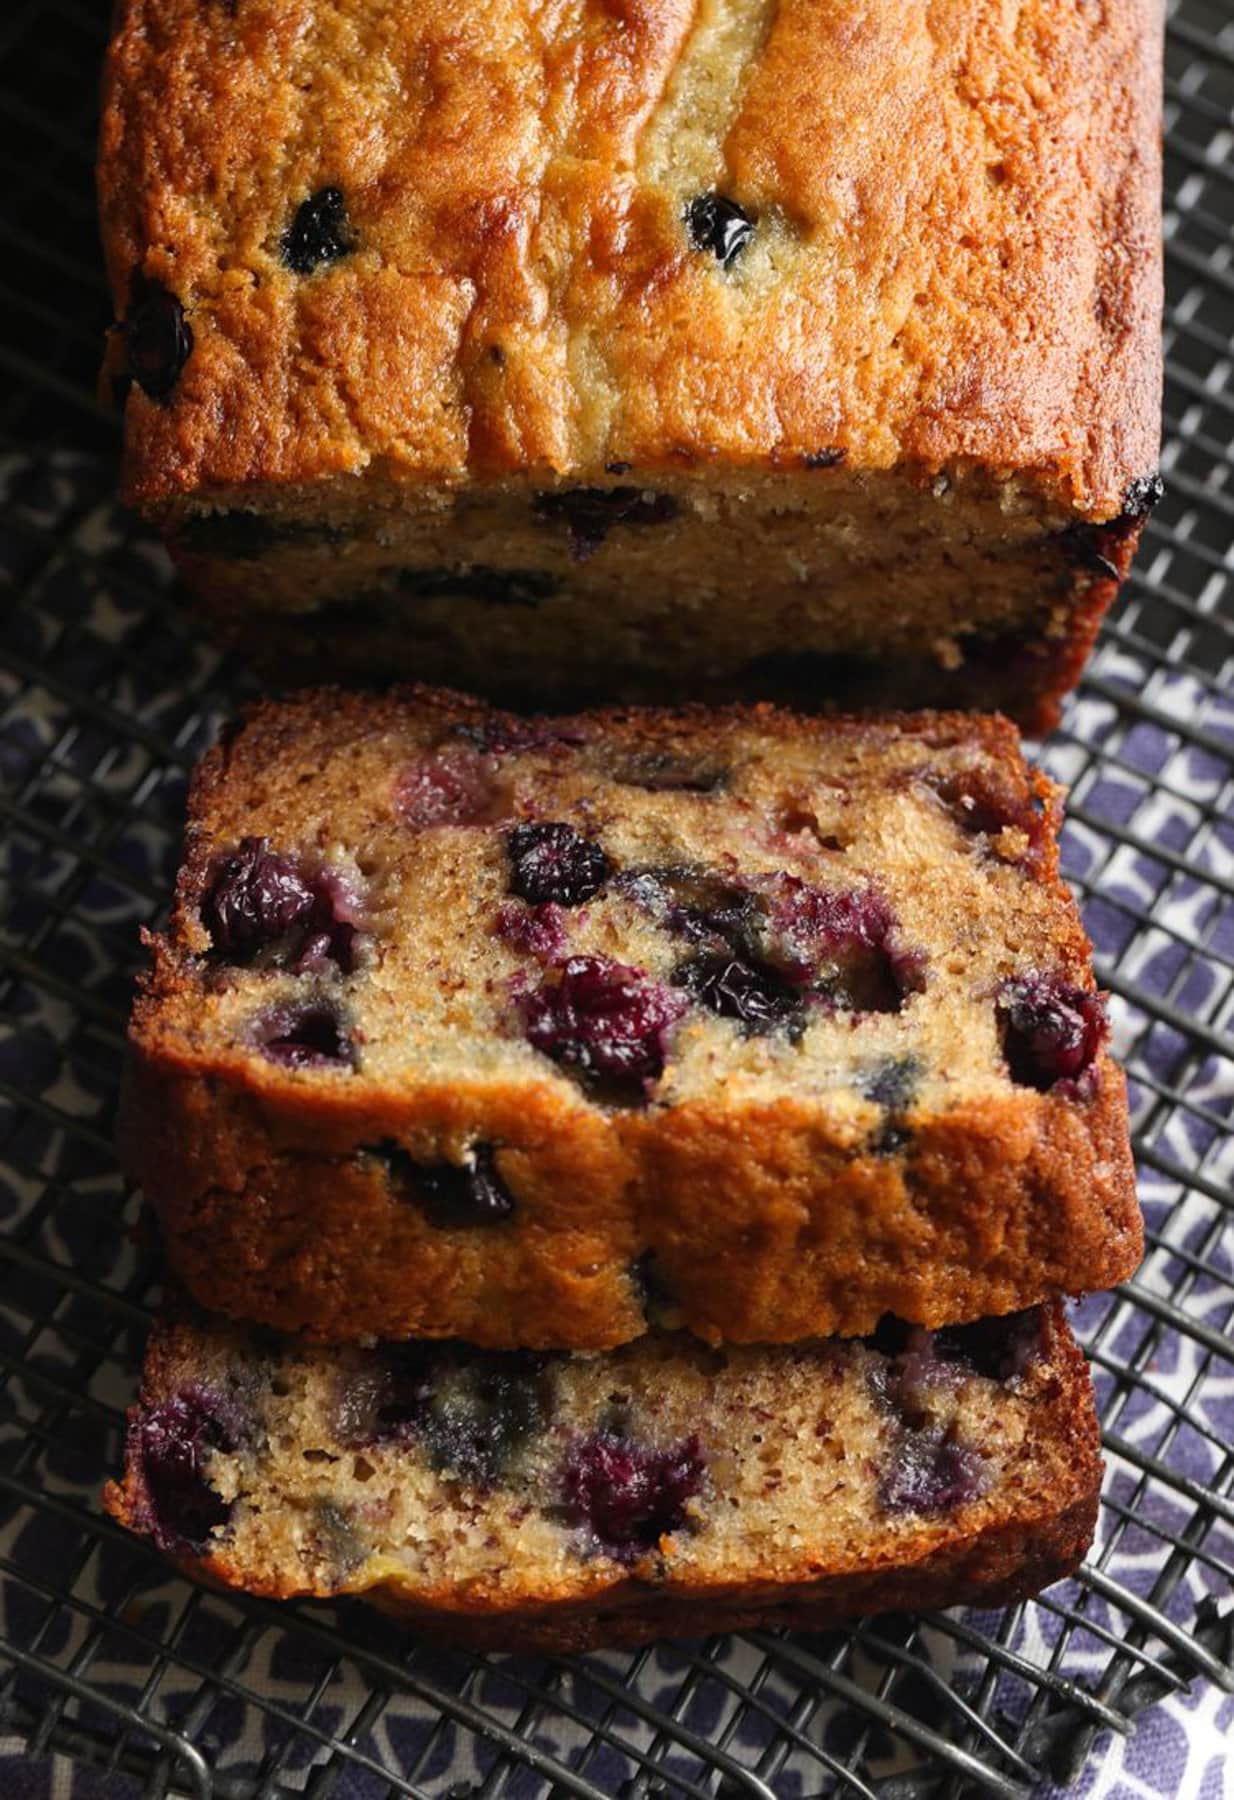 Top-down picture of blueberry banana bread sliced